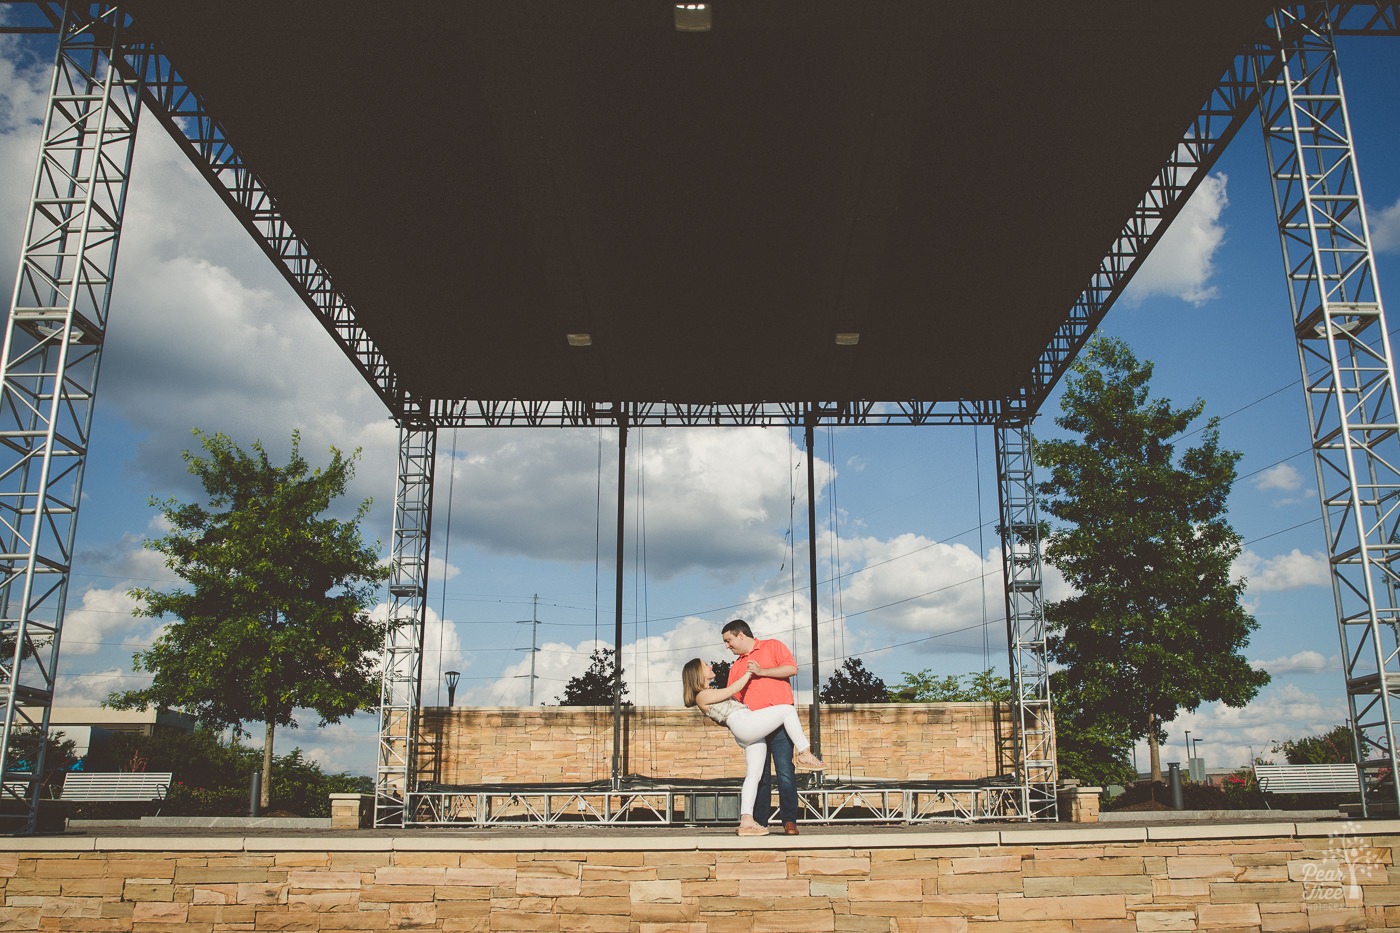 Married couple dancing on City Springs amphitheatre stage